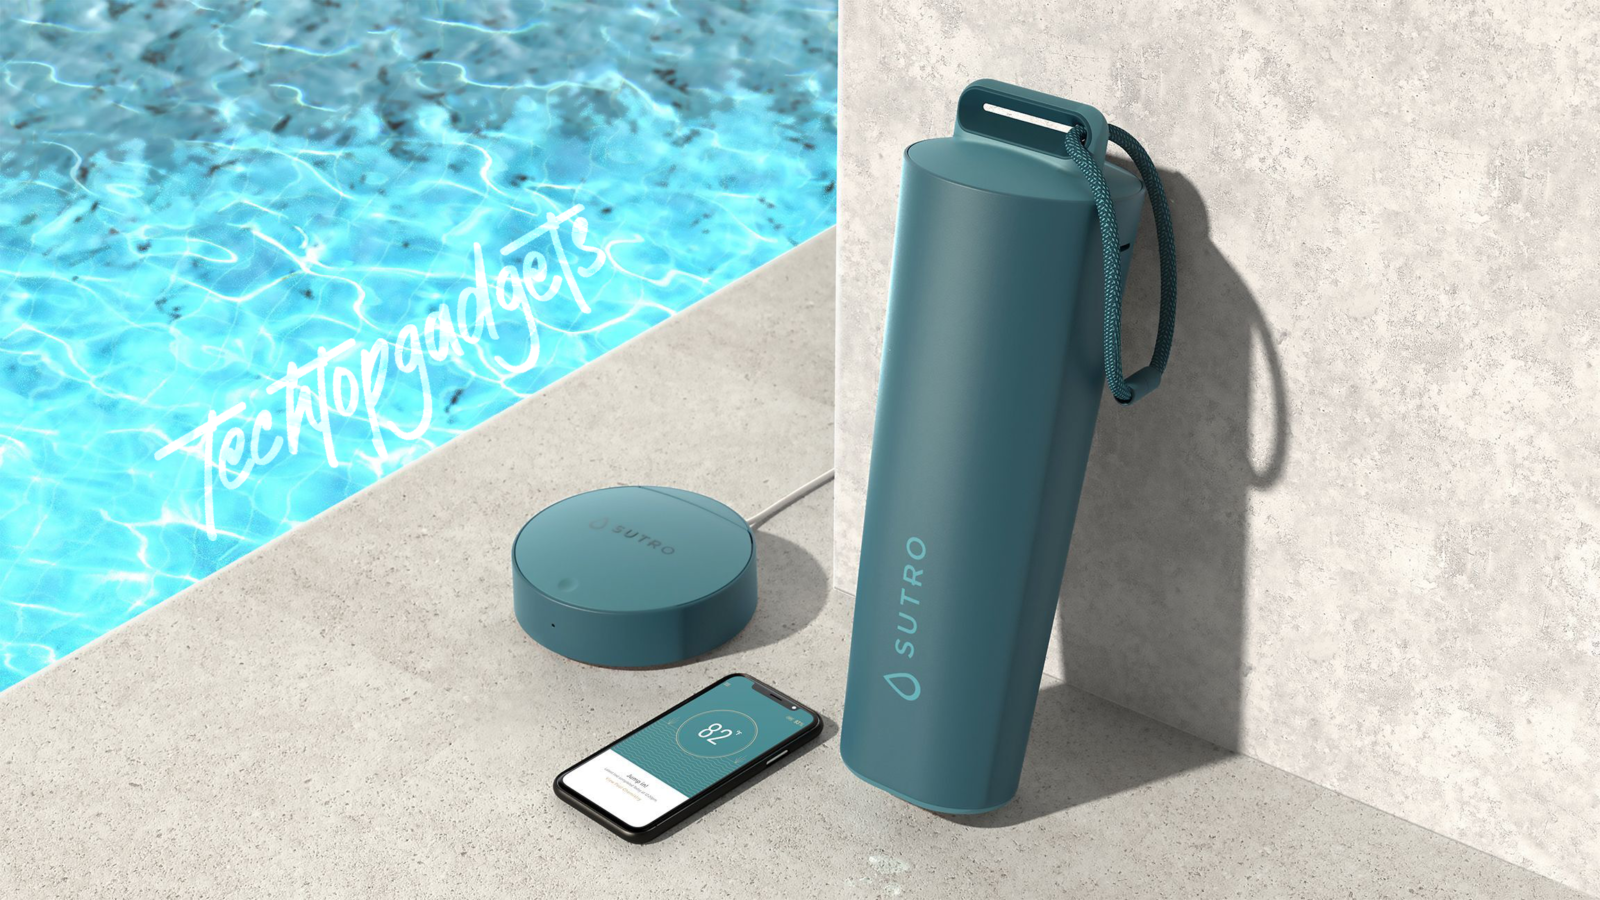 The Sutro smart pool monitor system, resting poolside with its charging base, pairs effortlessly with a smartphone app to ensure your pool remains in pristine condition.